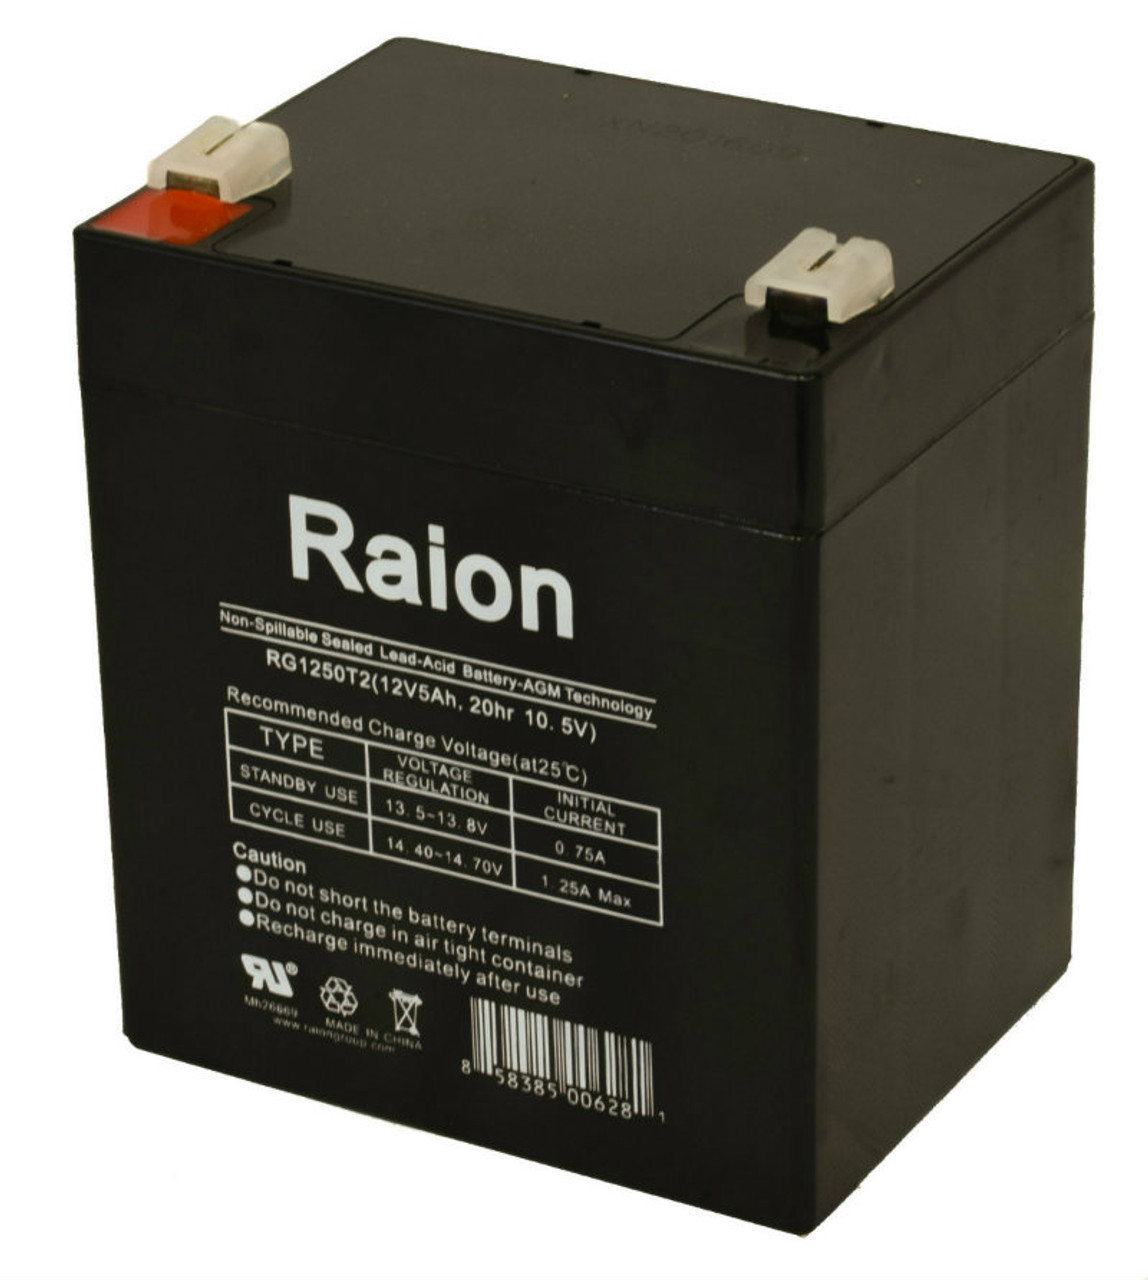 Raion Power RG1250T1 Replacement Alarm Security System Battery for Potter Electric BT-40